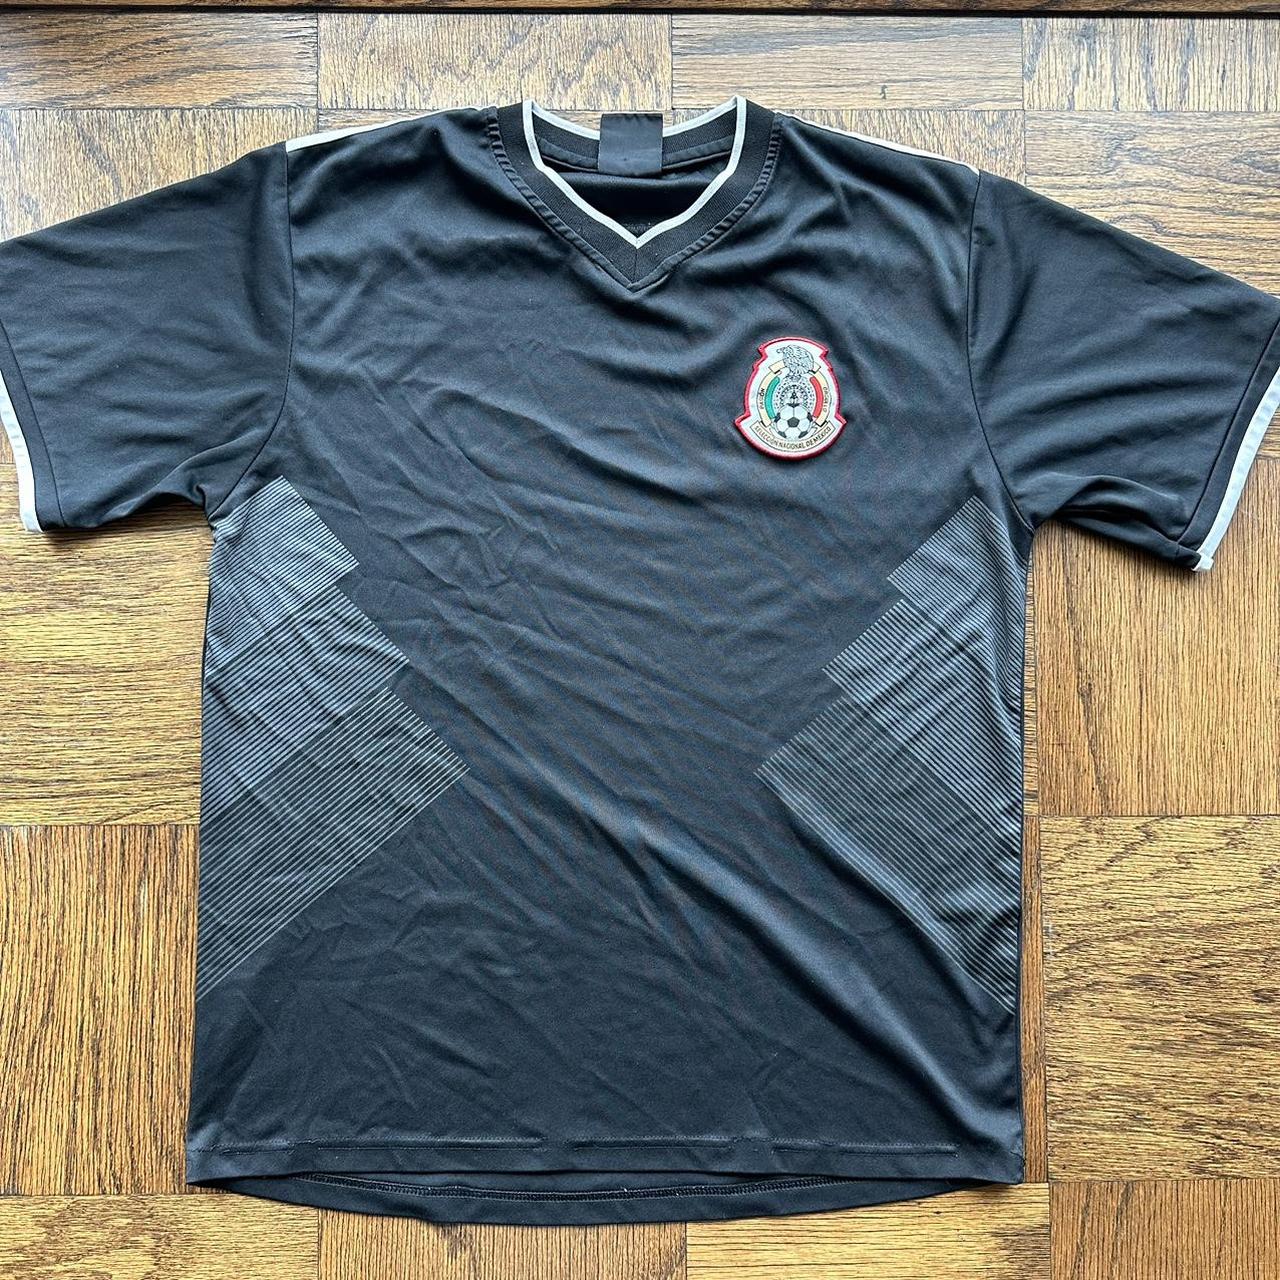 mexico soccer jersey 2018